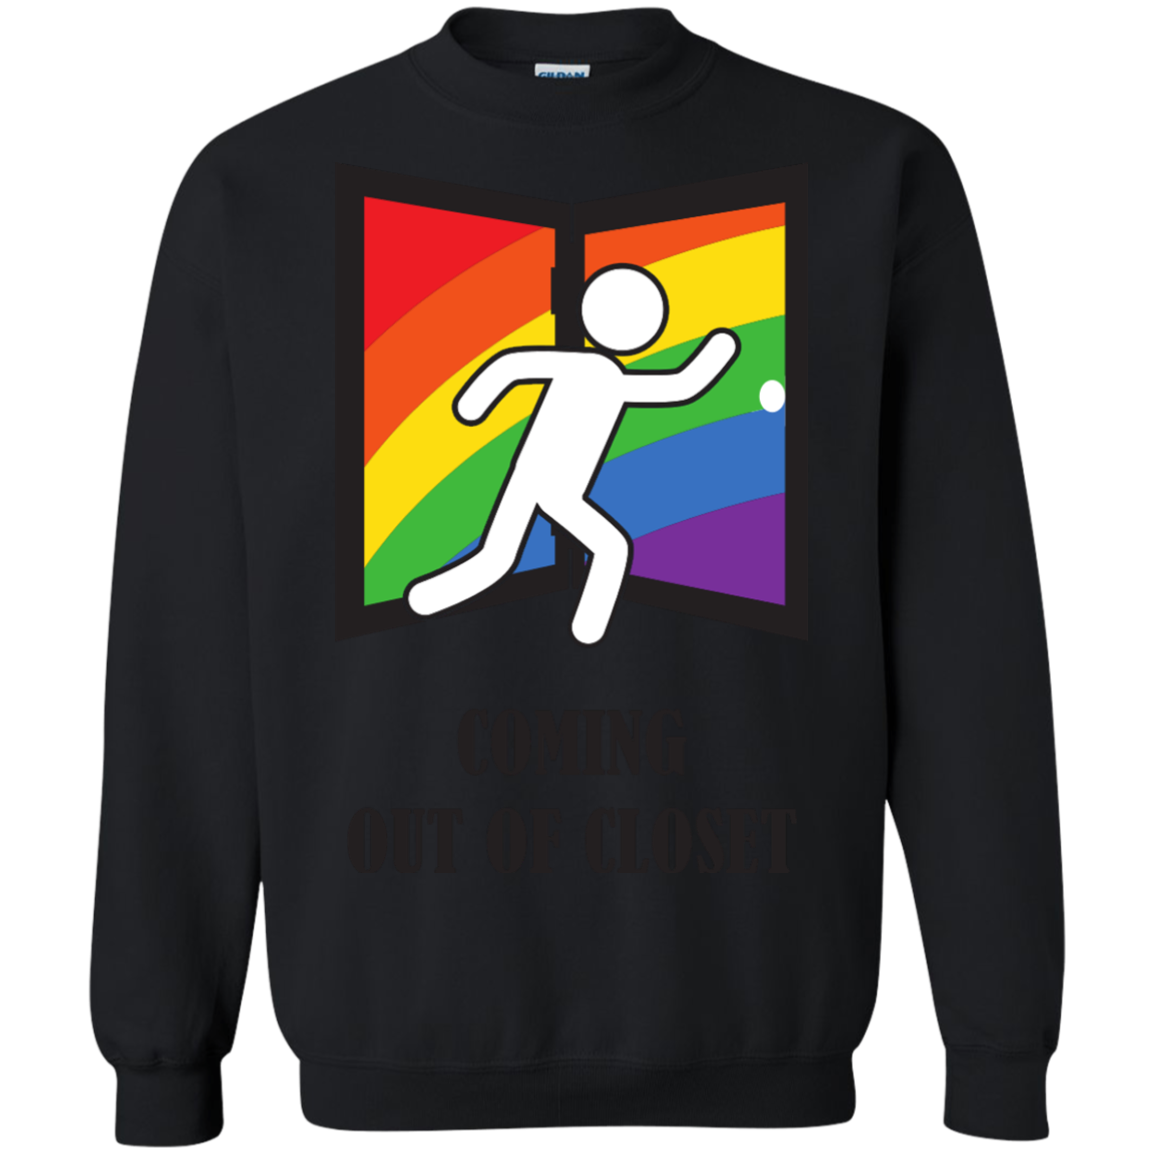 "National Coming Out Day" Special Shirt - Coming out of Closet